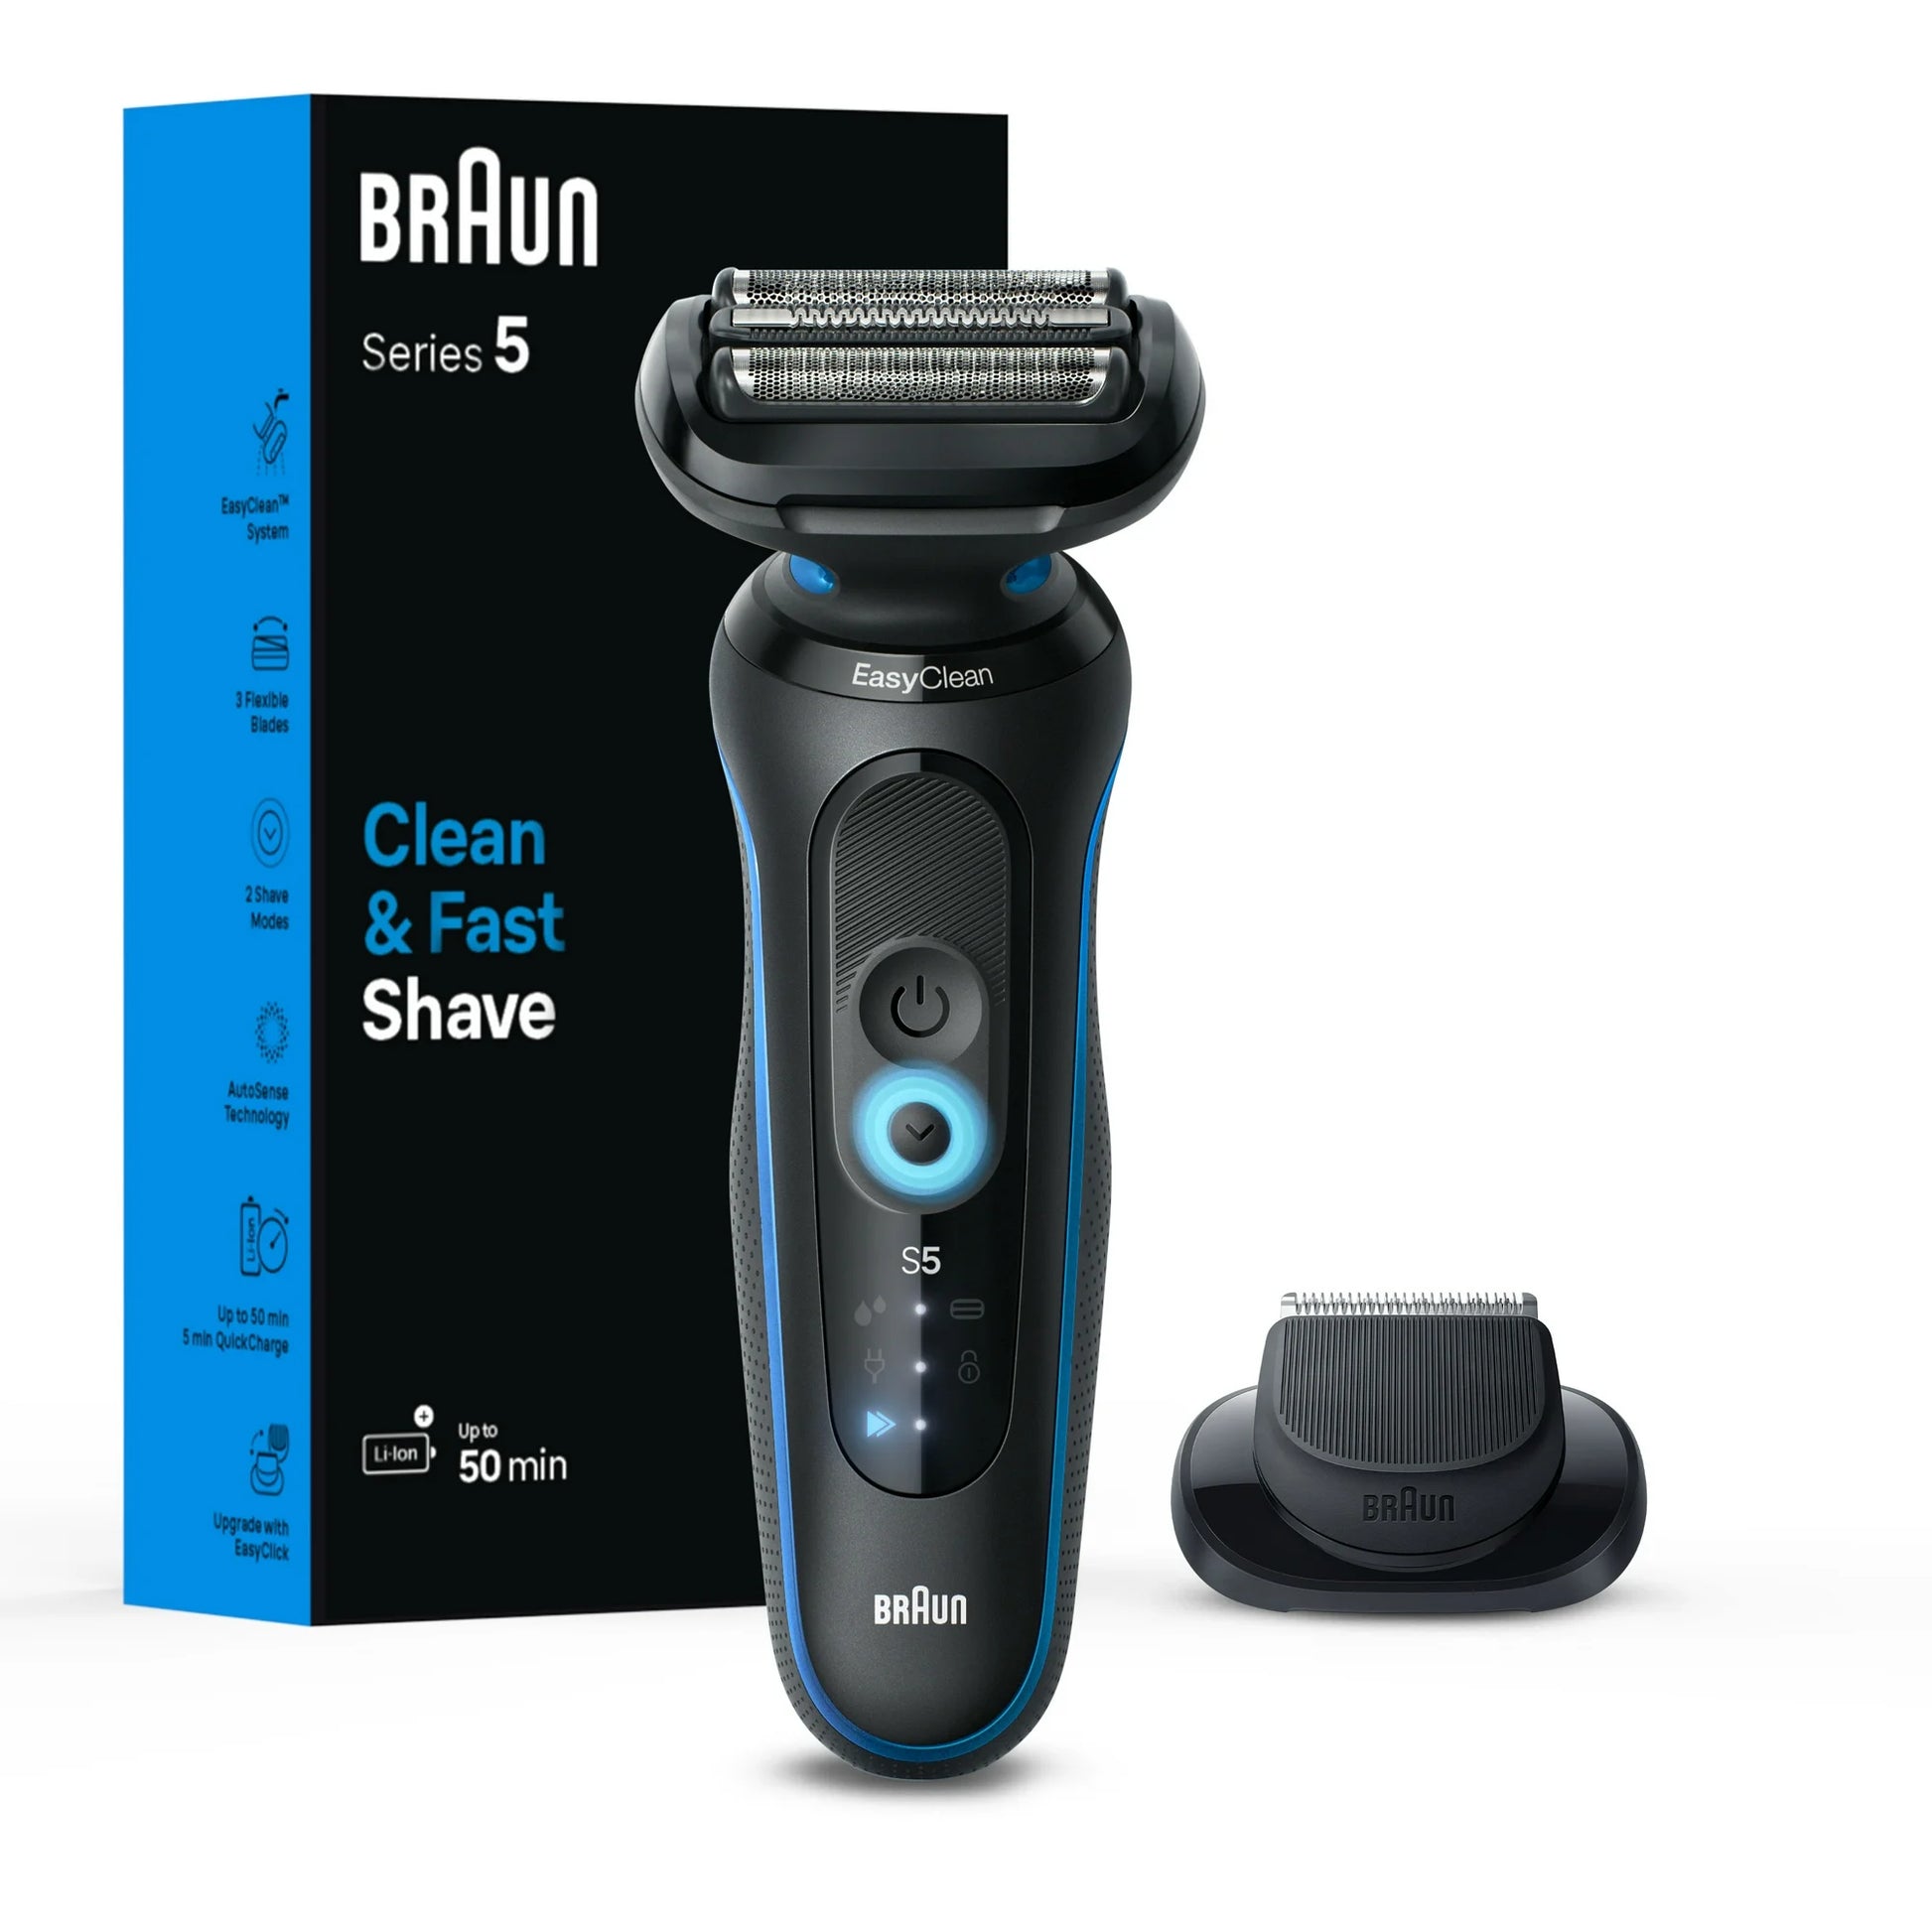 Braun Series 5 5118s, Electric Shaver with Precision Trimmer